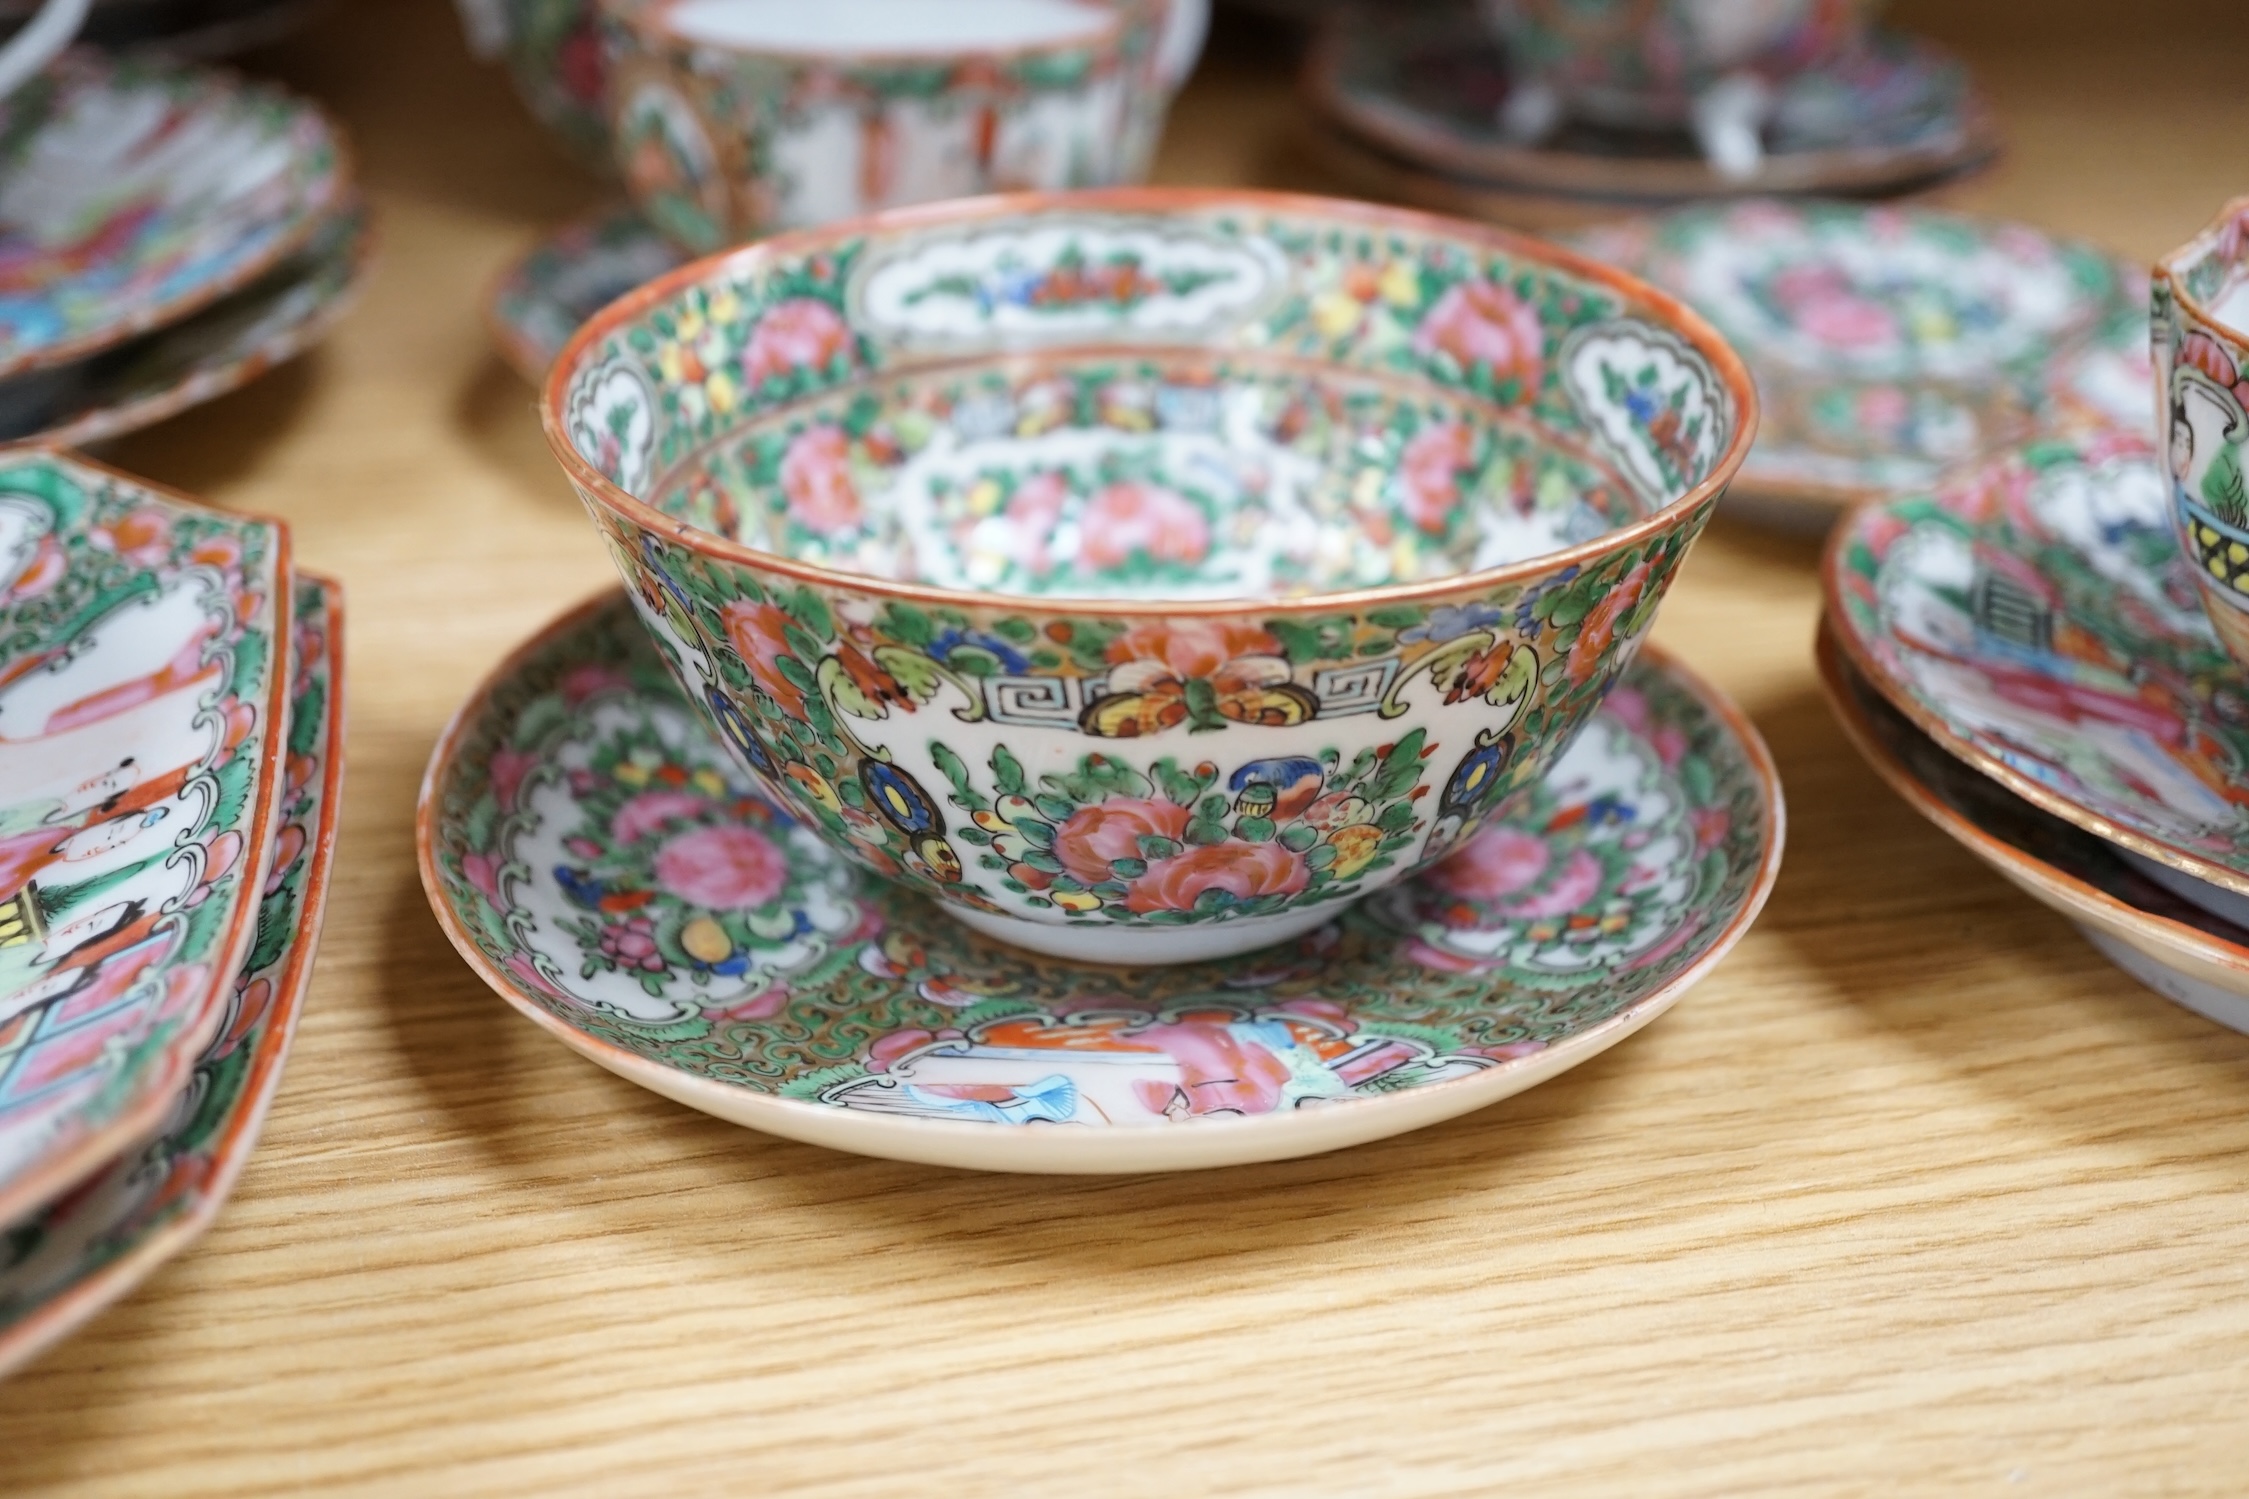 A Chinese famille rose part tea set including: five cups saucers and side plates, a teapot and cover, sugar bowl and cover, a cream jug, four cake plates and two square plates (27)